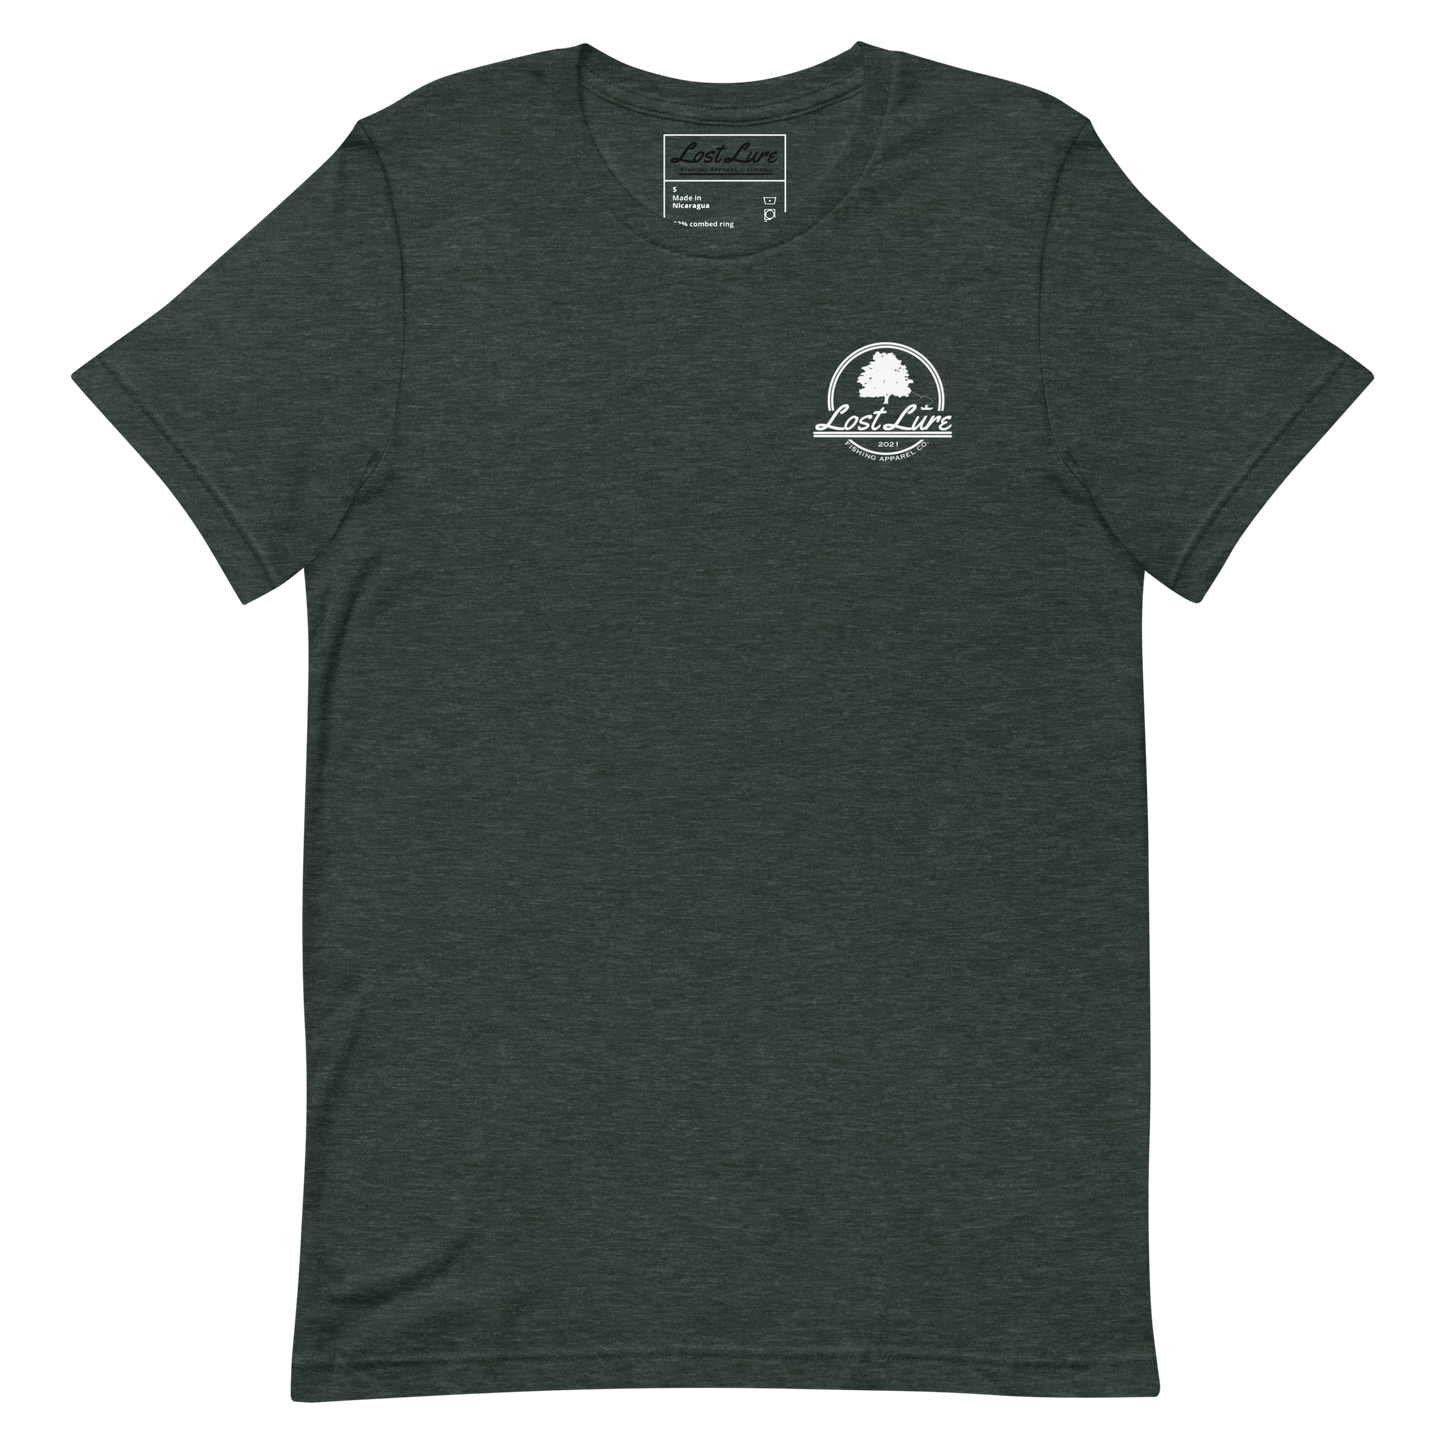 Cutthroat Trout fishing shirt. It’s an American traditional style design with a cutthroat trout and a dagger. The shirt reads Cutthroat trout, est. 2021, lost lure fishing apparel company. The front of the shirt has the lost lure logo. Forrest green fishing shirt, front side